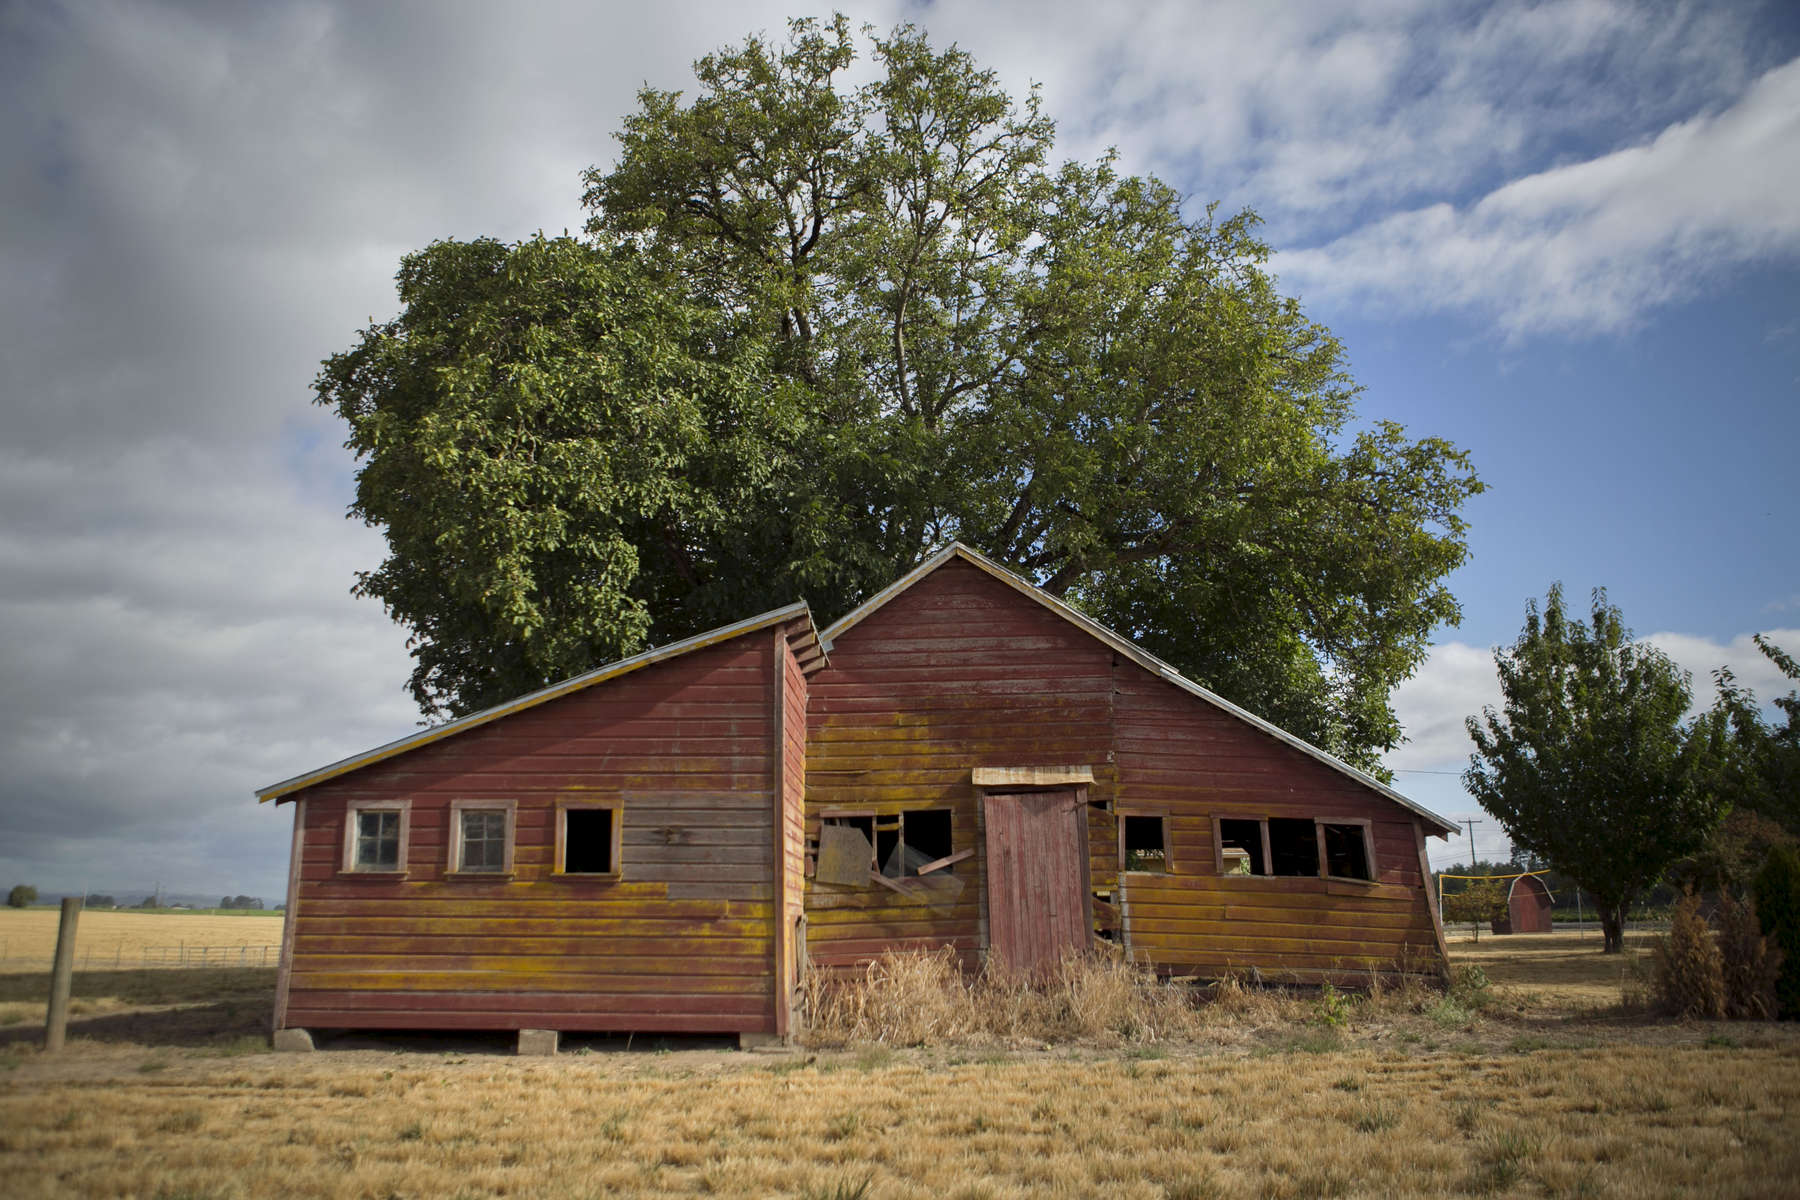 The chicken barn is now only used for storage, one of many outbuildings on the 1915 Taghon farm in Cornelius, founded in by Theophile Cappoen, and is now owned by Theophile's great-great-grandson Joe Finegan and his wife Jennifer.  